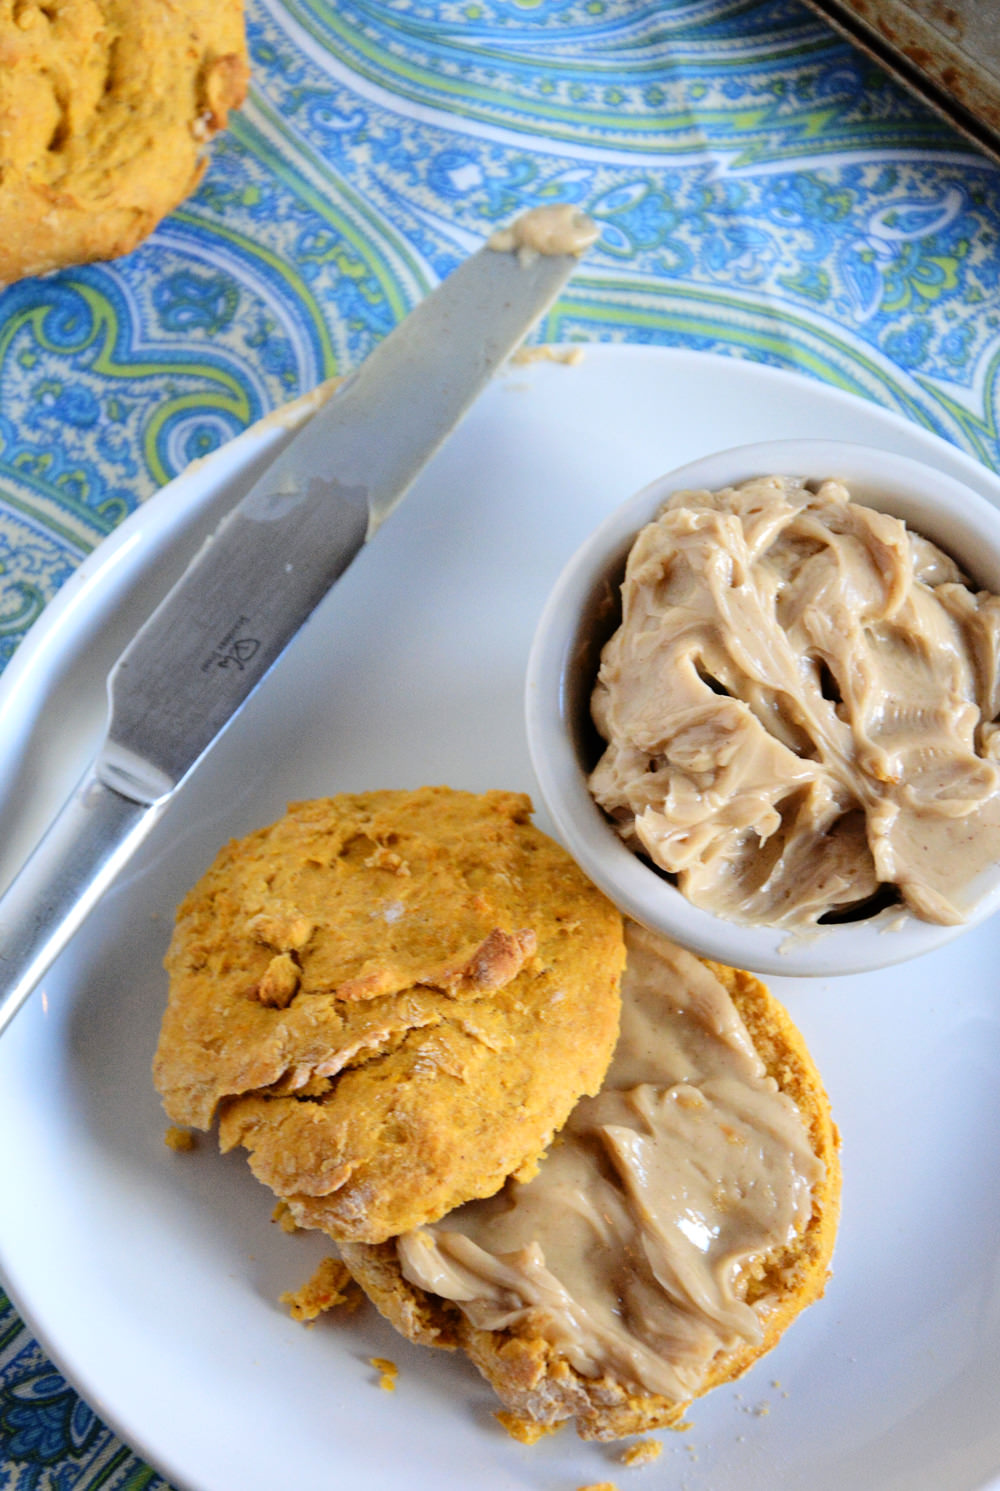 Sweet Potato Biscuits with Cinnamon Maple Butter | The Housewife in Training Files